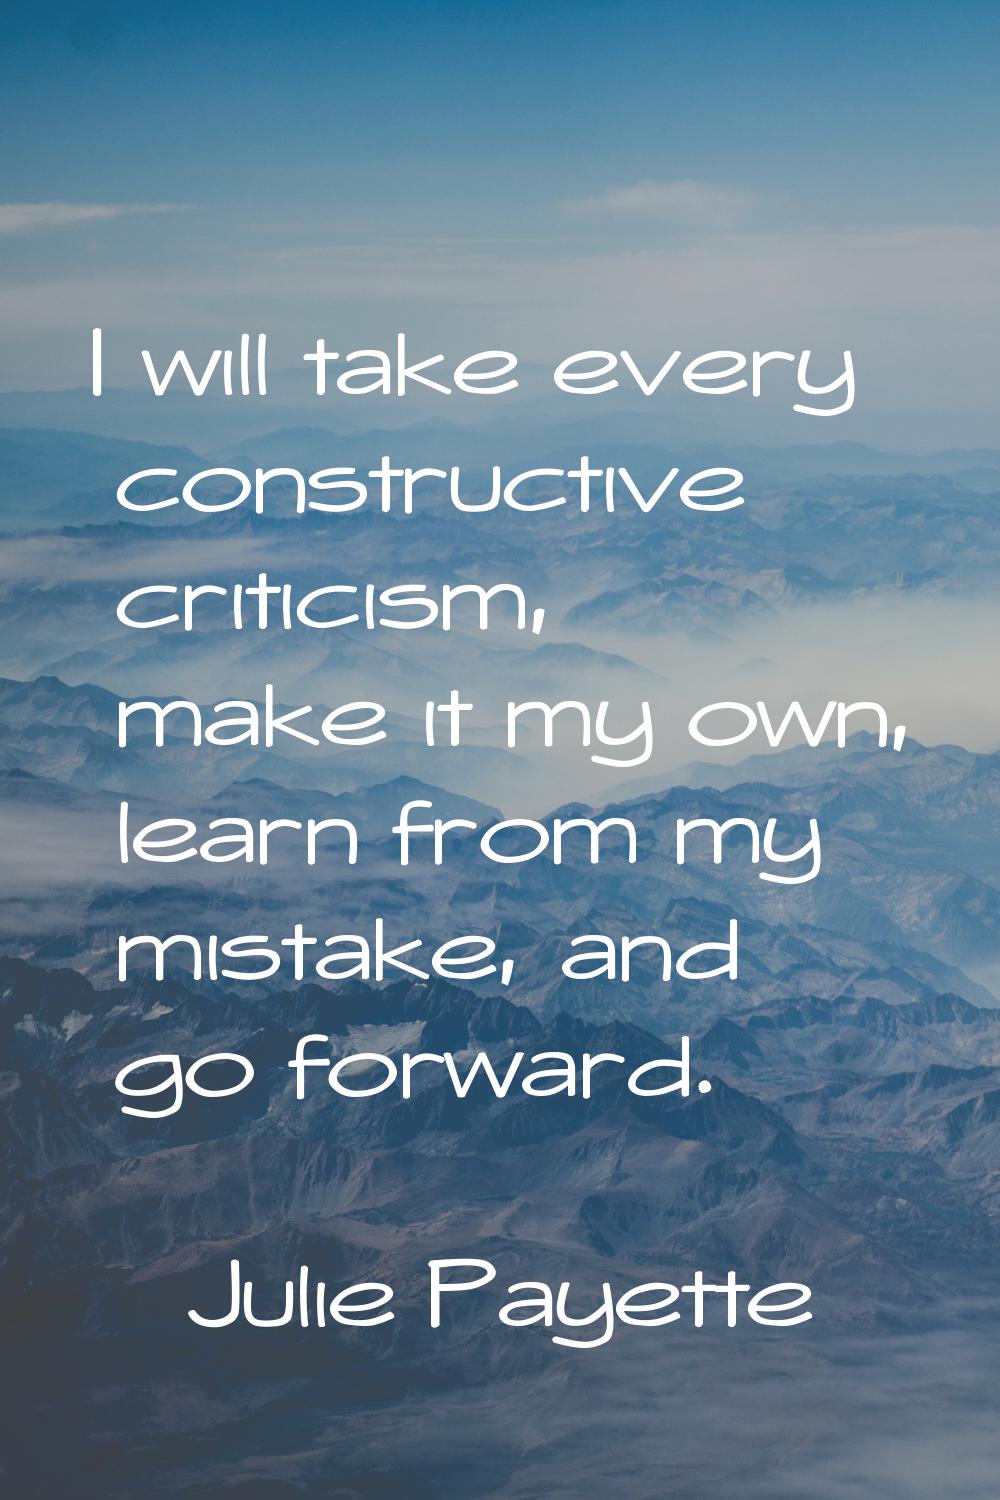 I will take every constructive criticism, make it my own, learn from my mistake, and go forward.